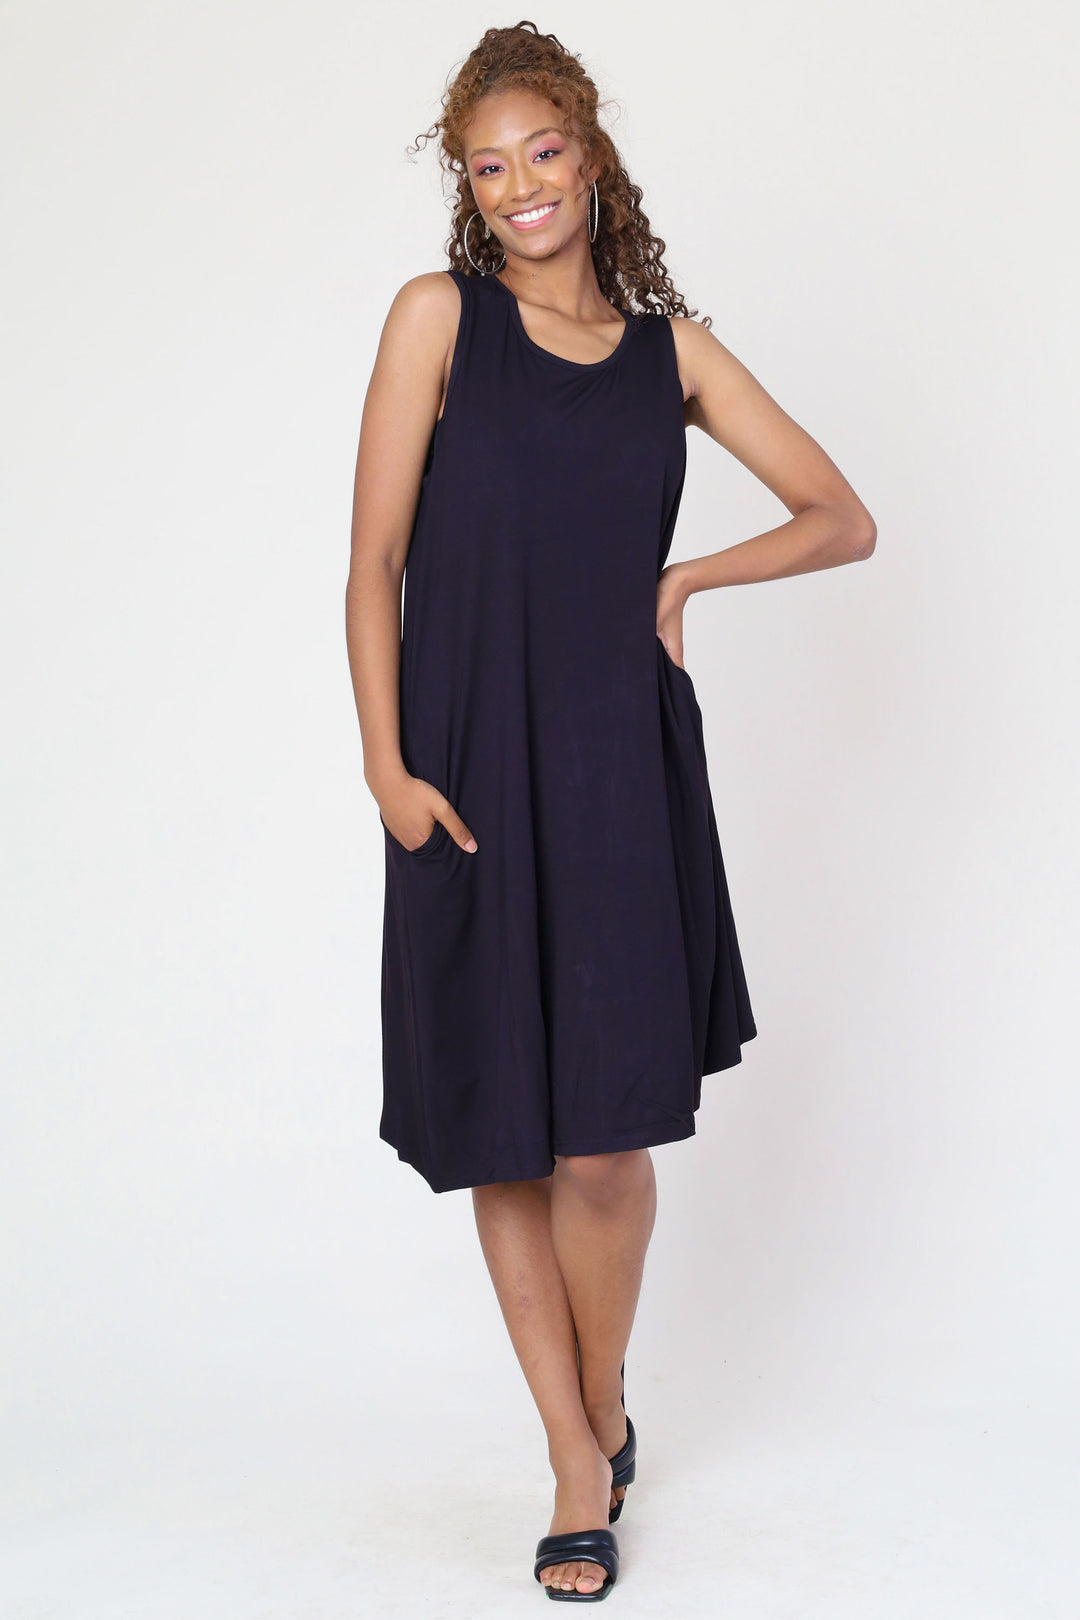 Funsport Summer 2024 Versatile and comfortable, our Sleeveless Dress can be worn in a variety of ways for any occasion. Made with ultra soft jersey material, its slight a-line style is perfect for layering and creating a chic, laid back look this summer.